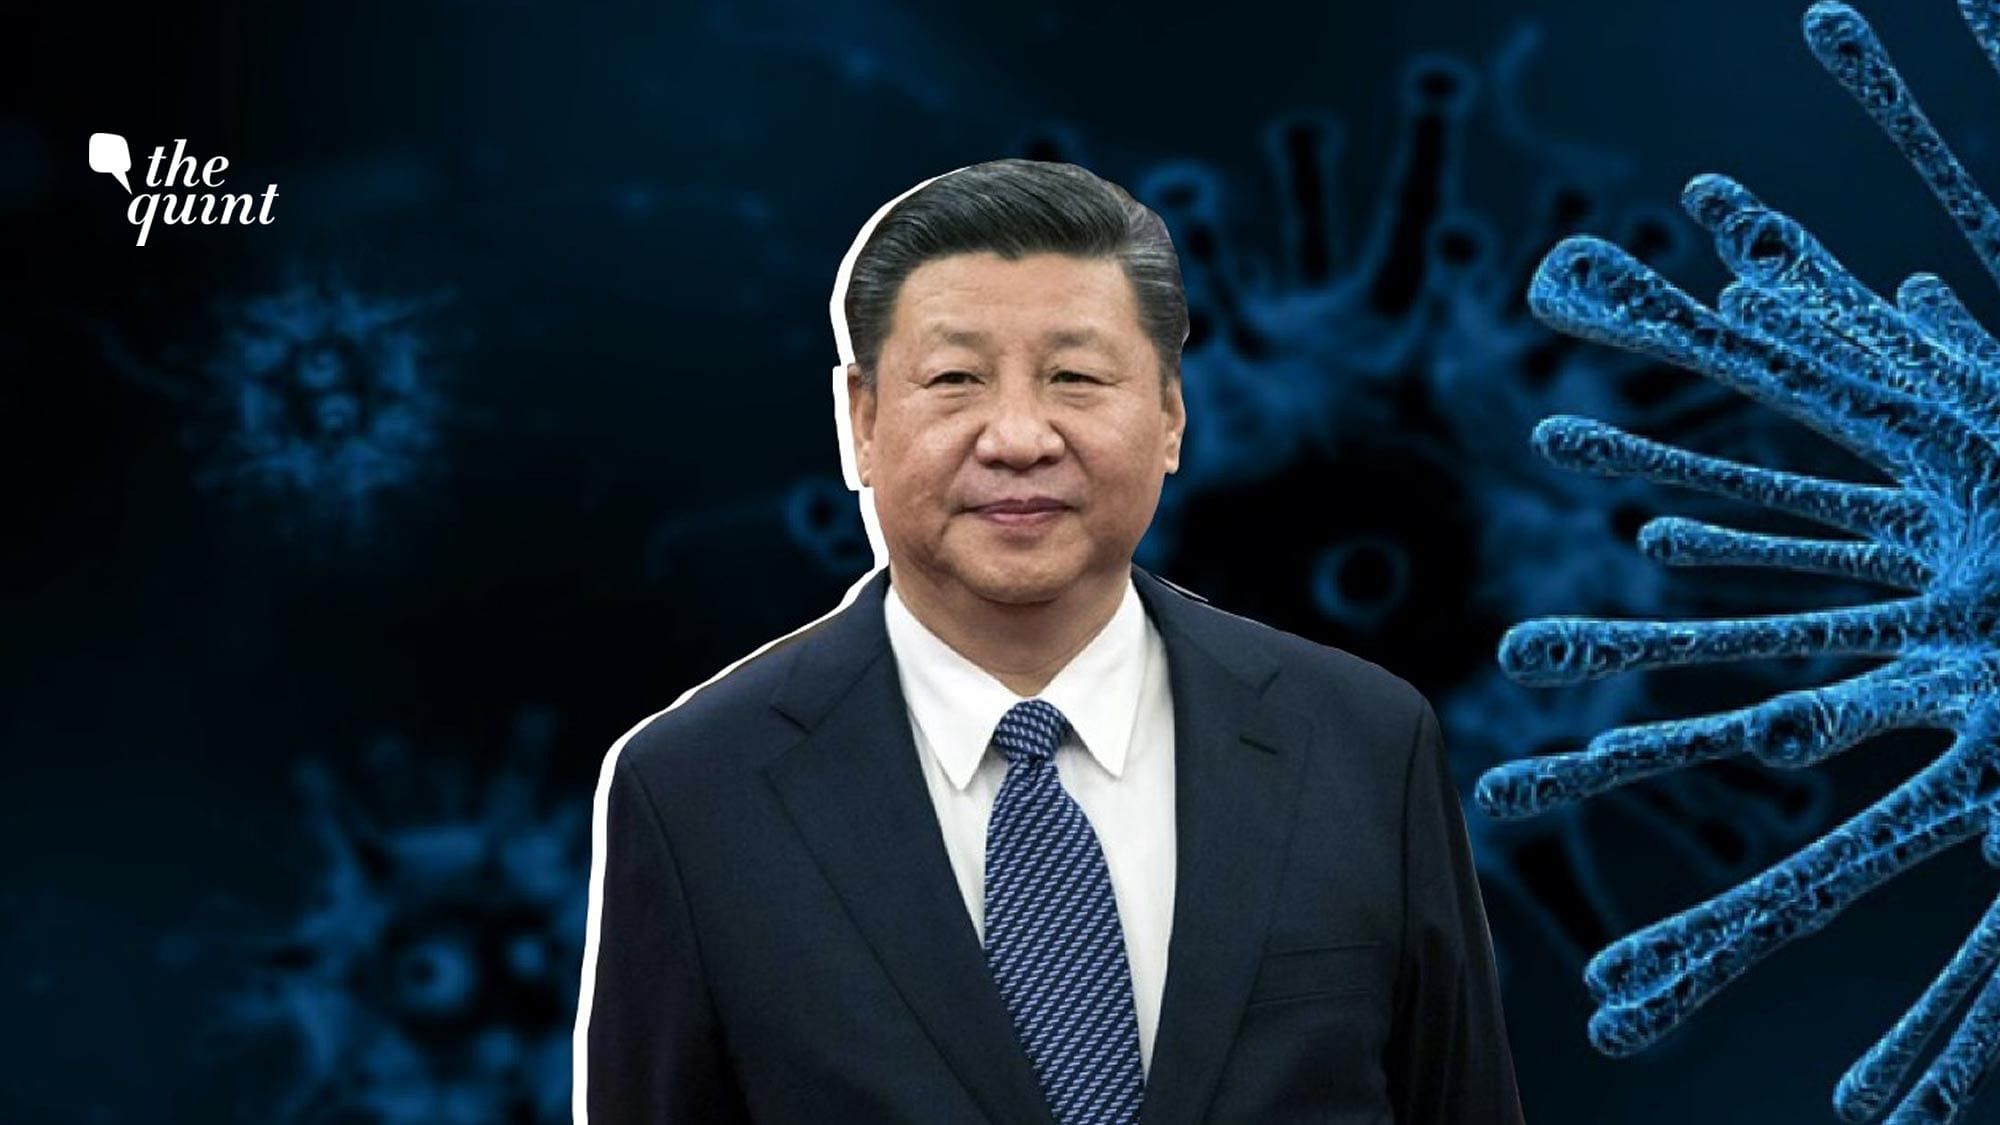 Image of Chinese President Xi Jinping used for representational purposes.